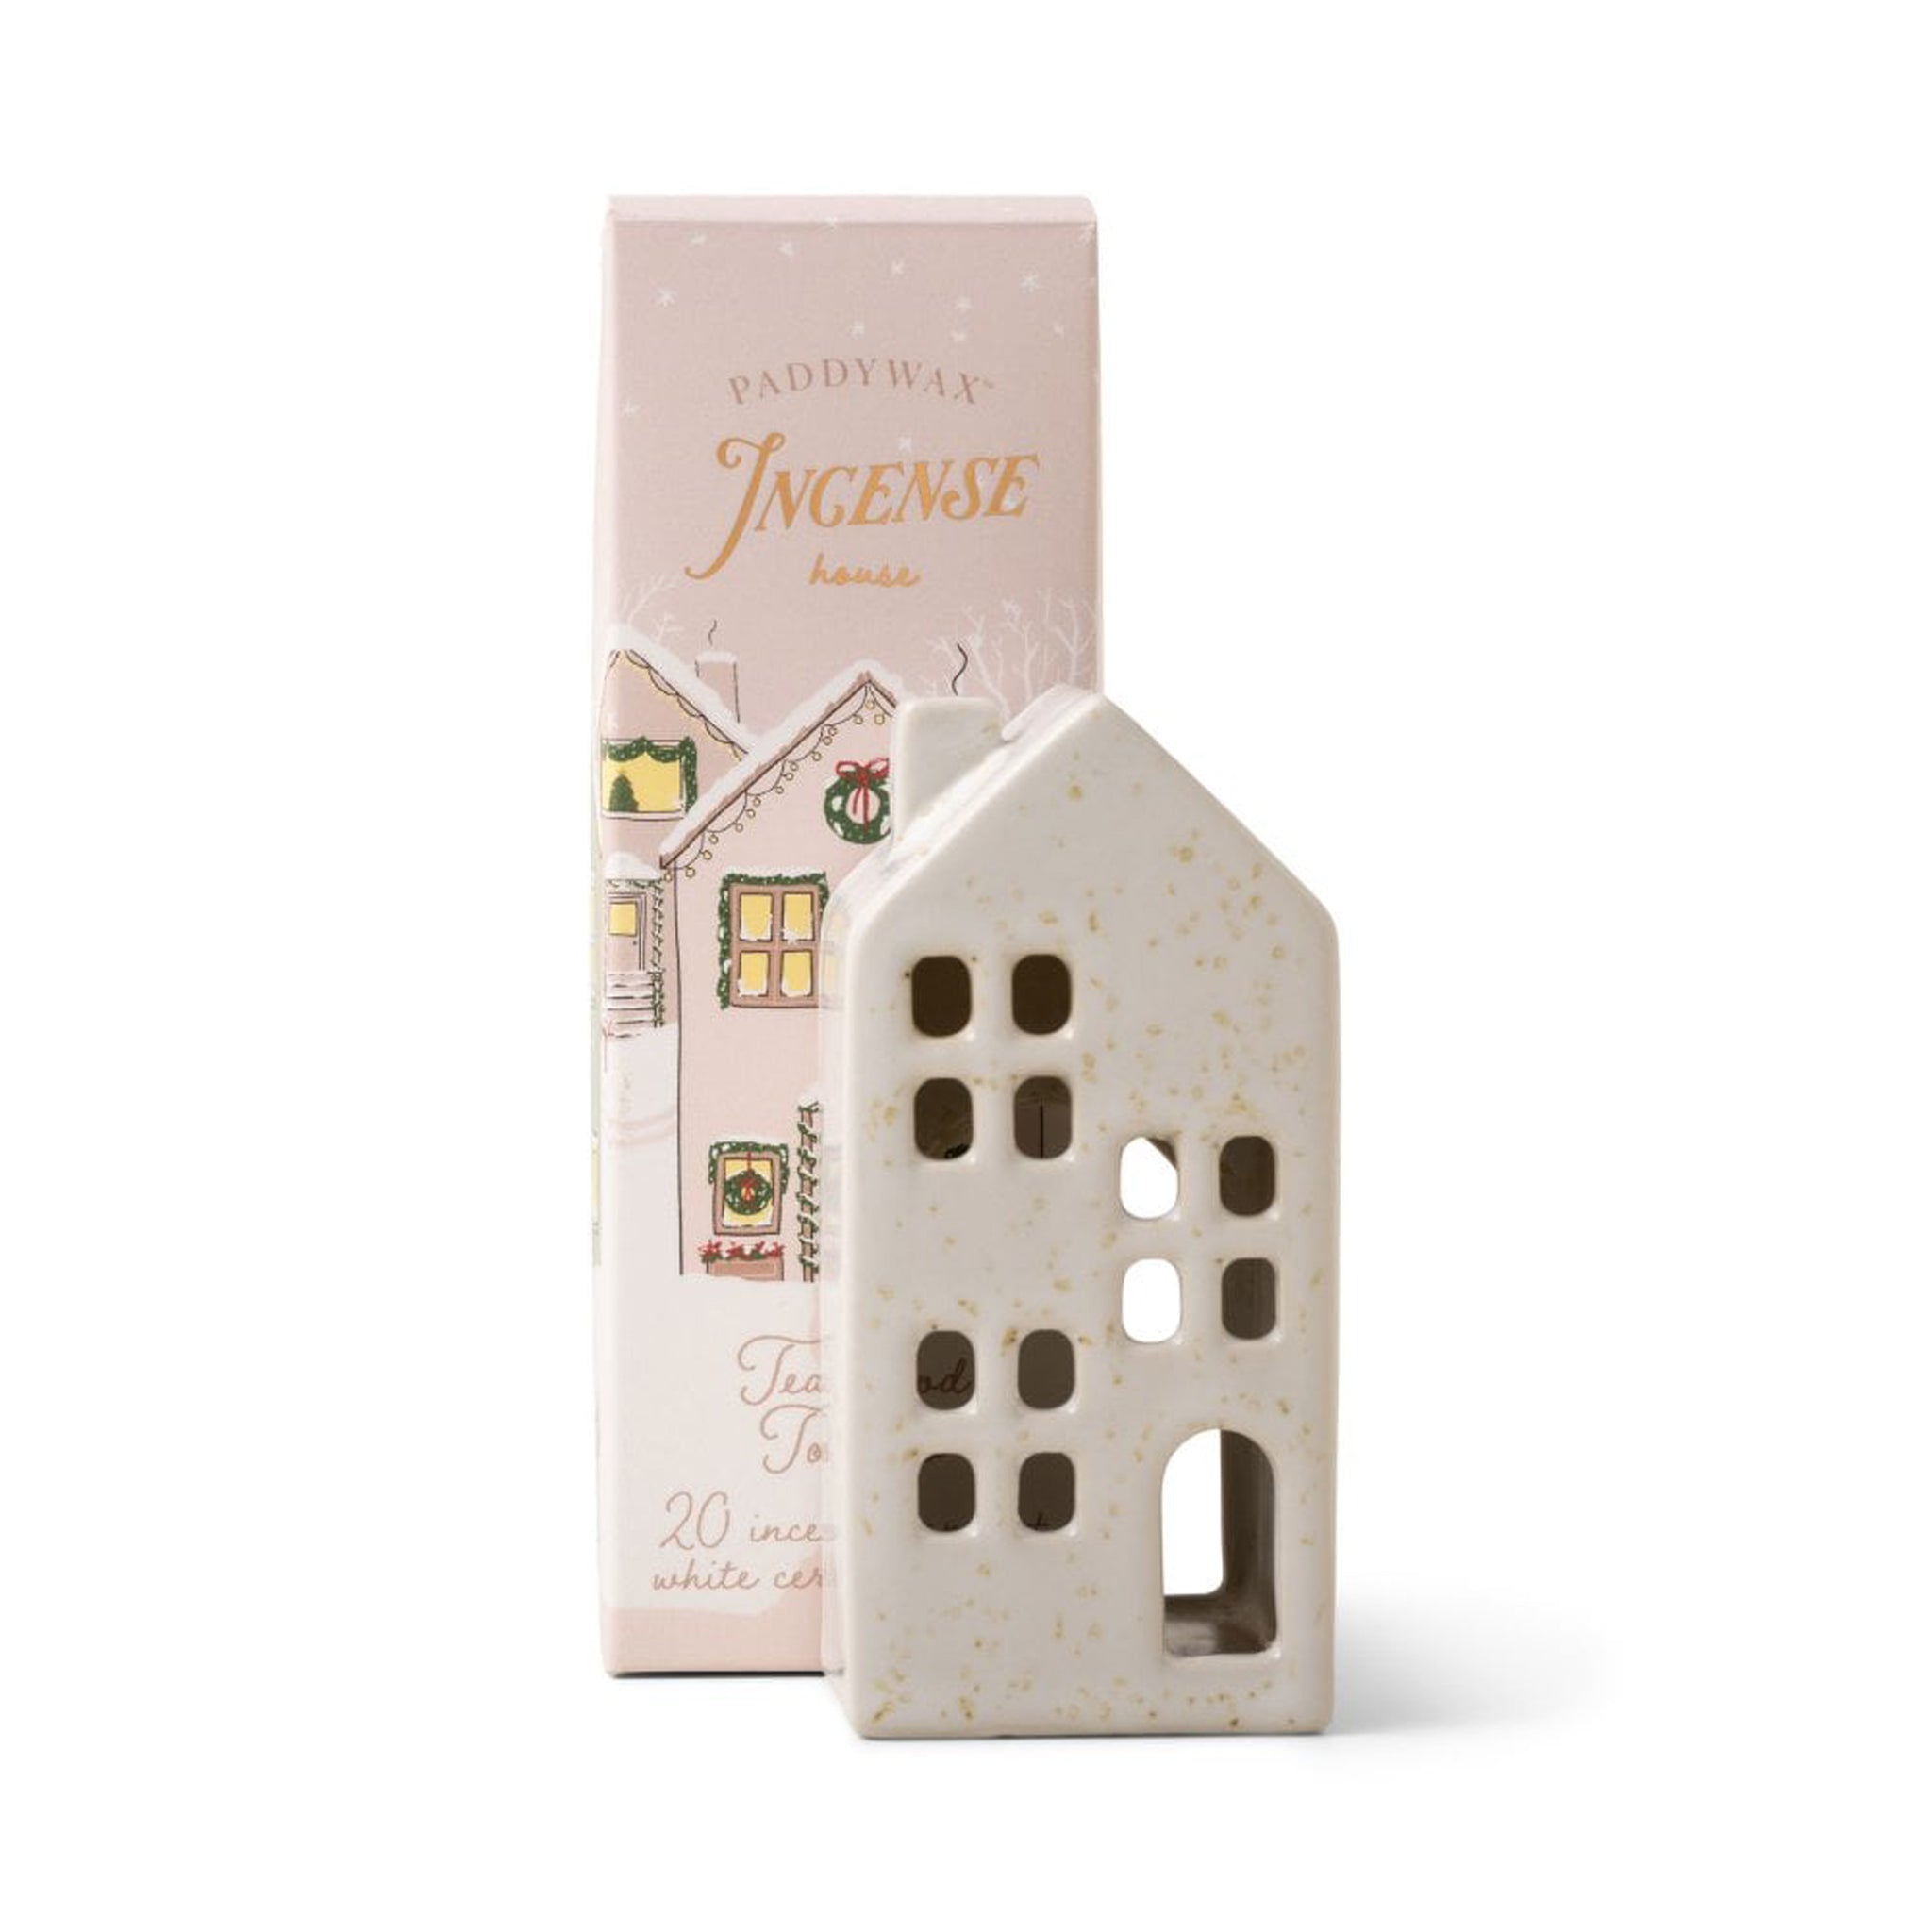 White Incense Town House - Teakwood & Tobacco (Inc 20 Cones)